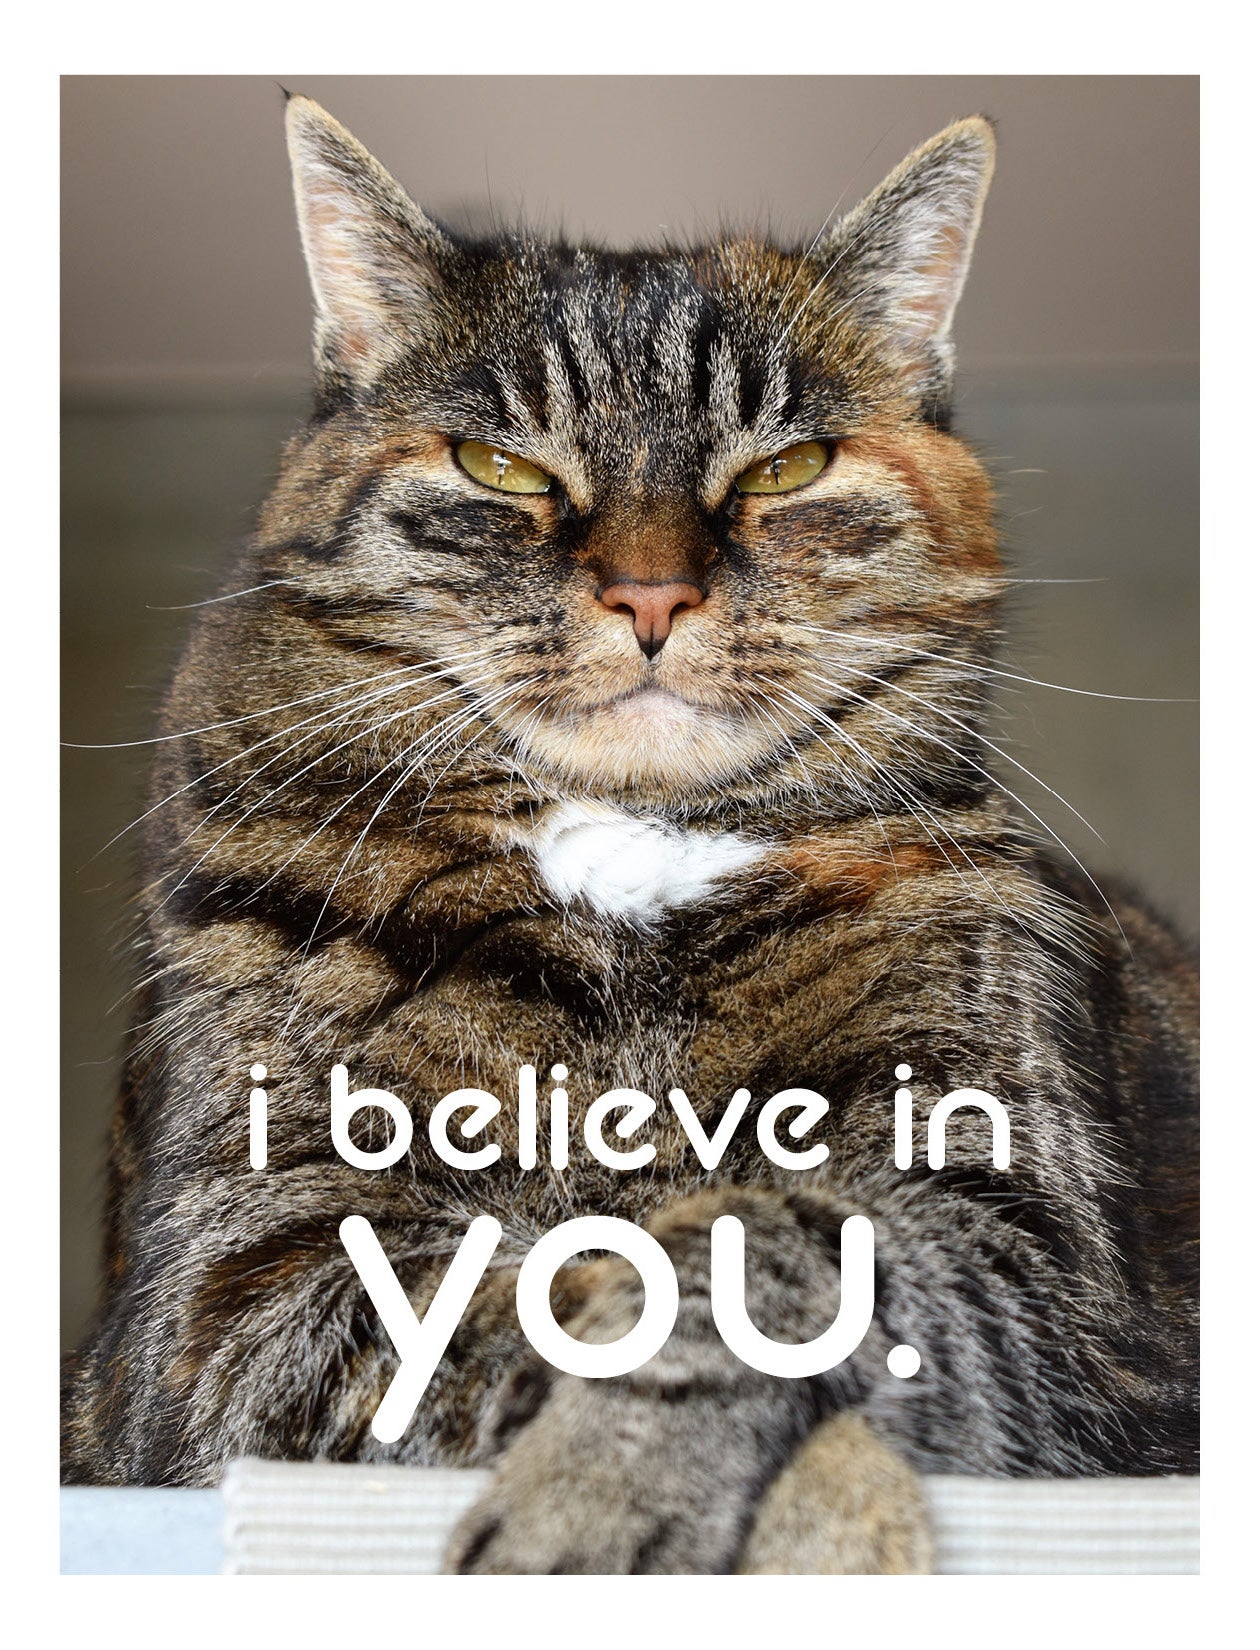 The I Believe in You From the Cat Card